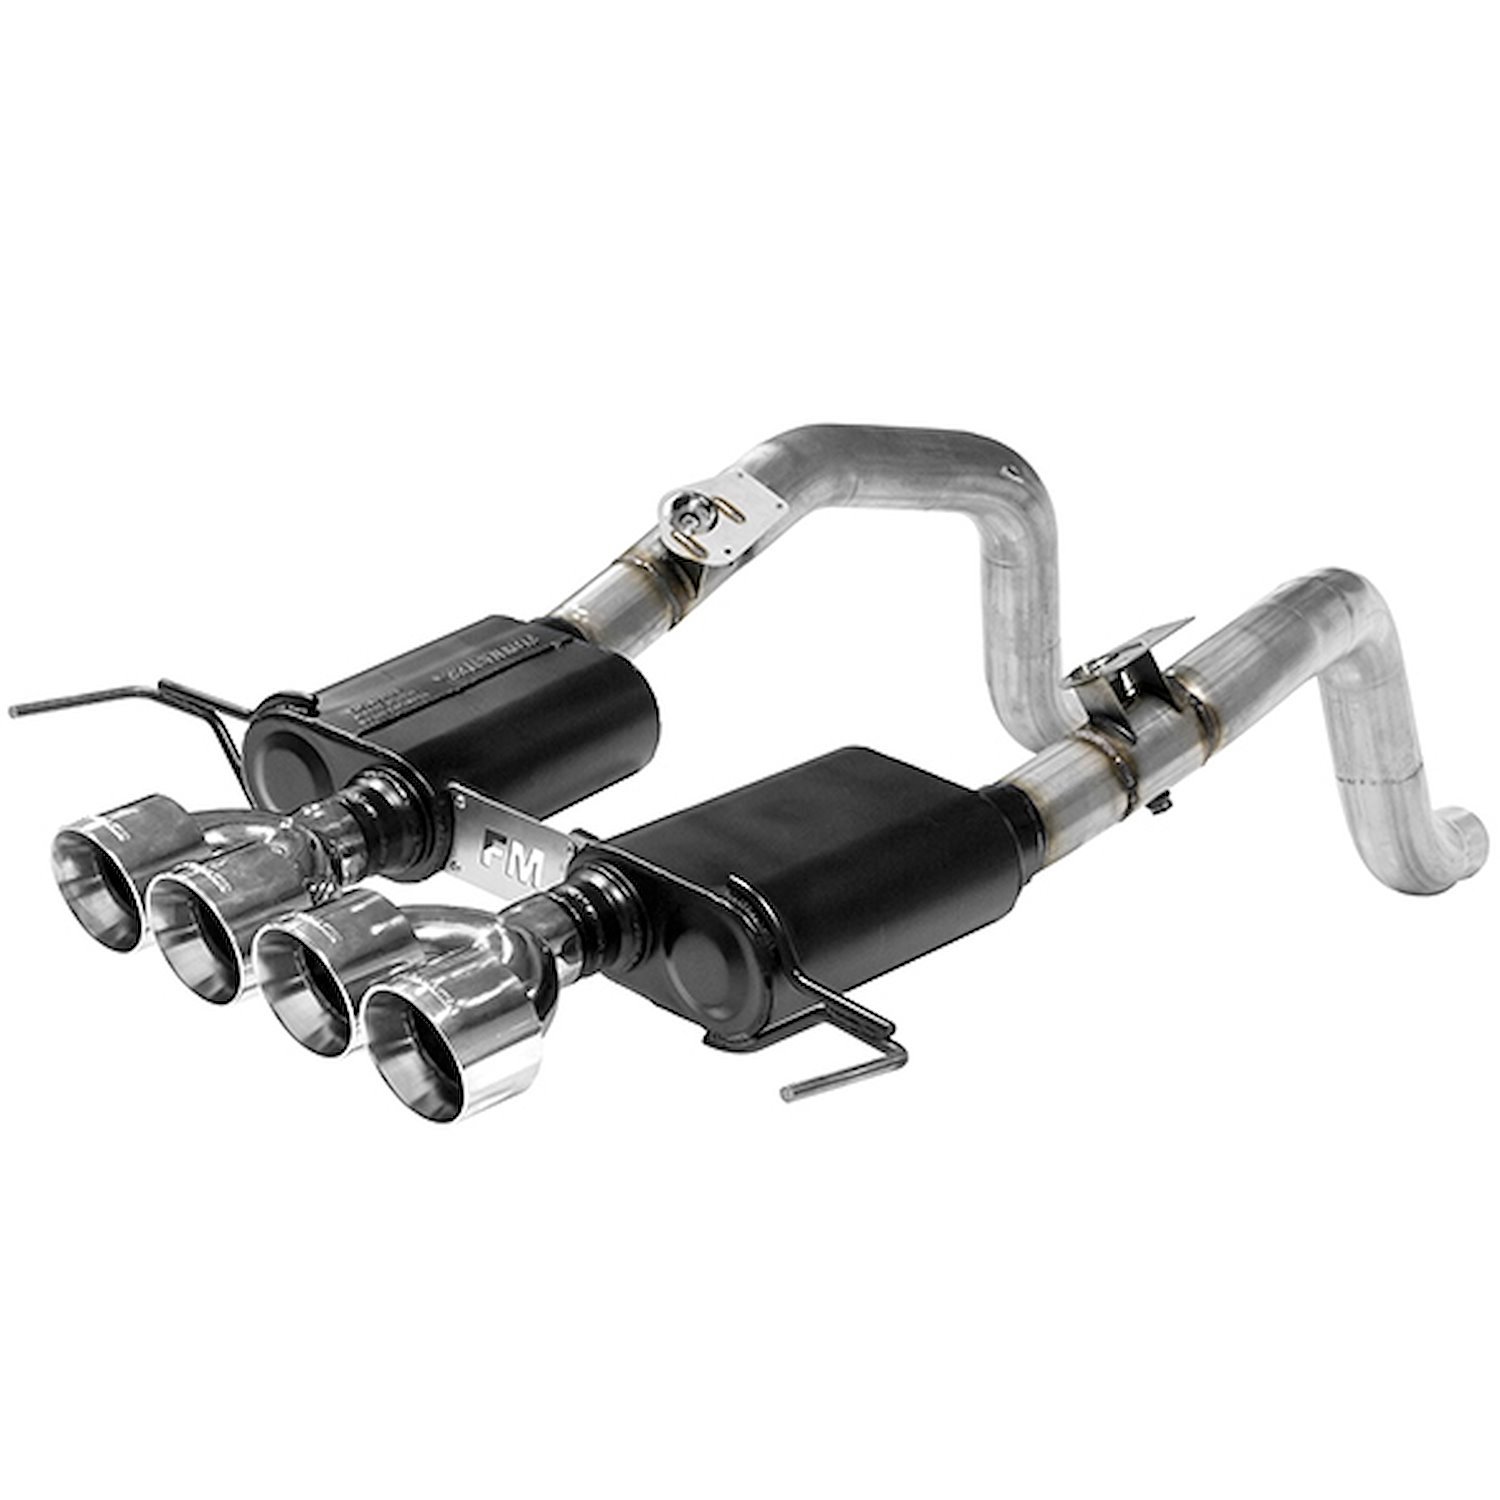 Outlaw Series Axle-Back Exhaust System 2014-2018 Chevy Corvette Stingray 6.2L V8